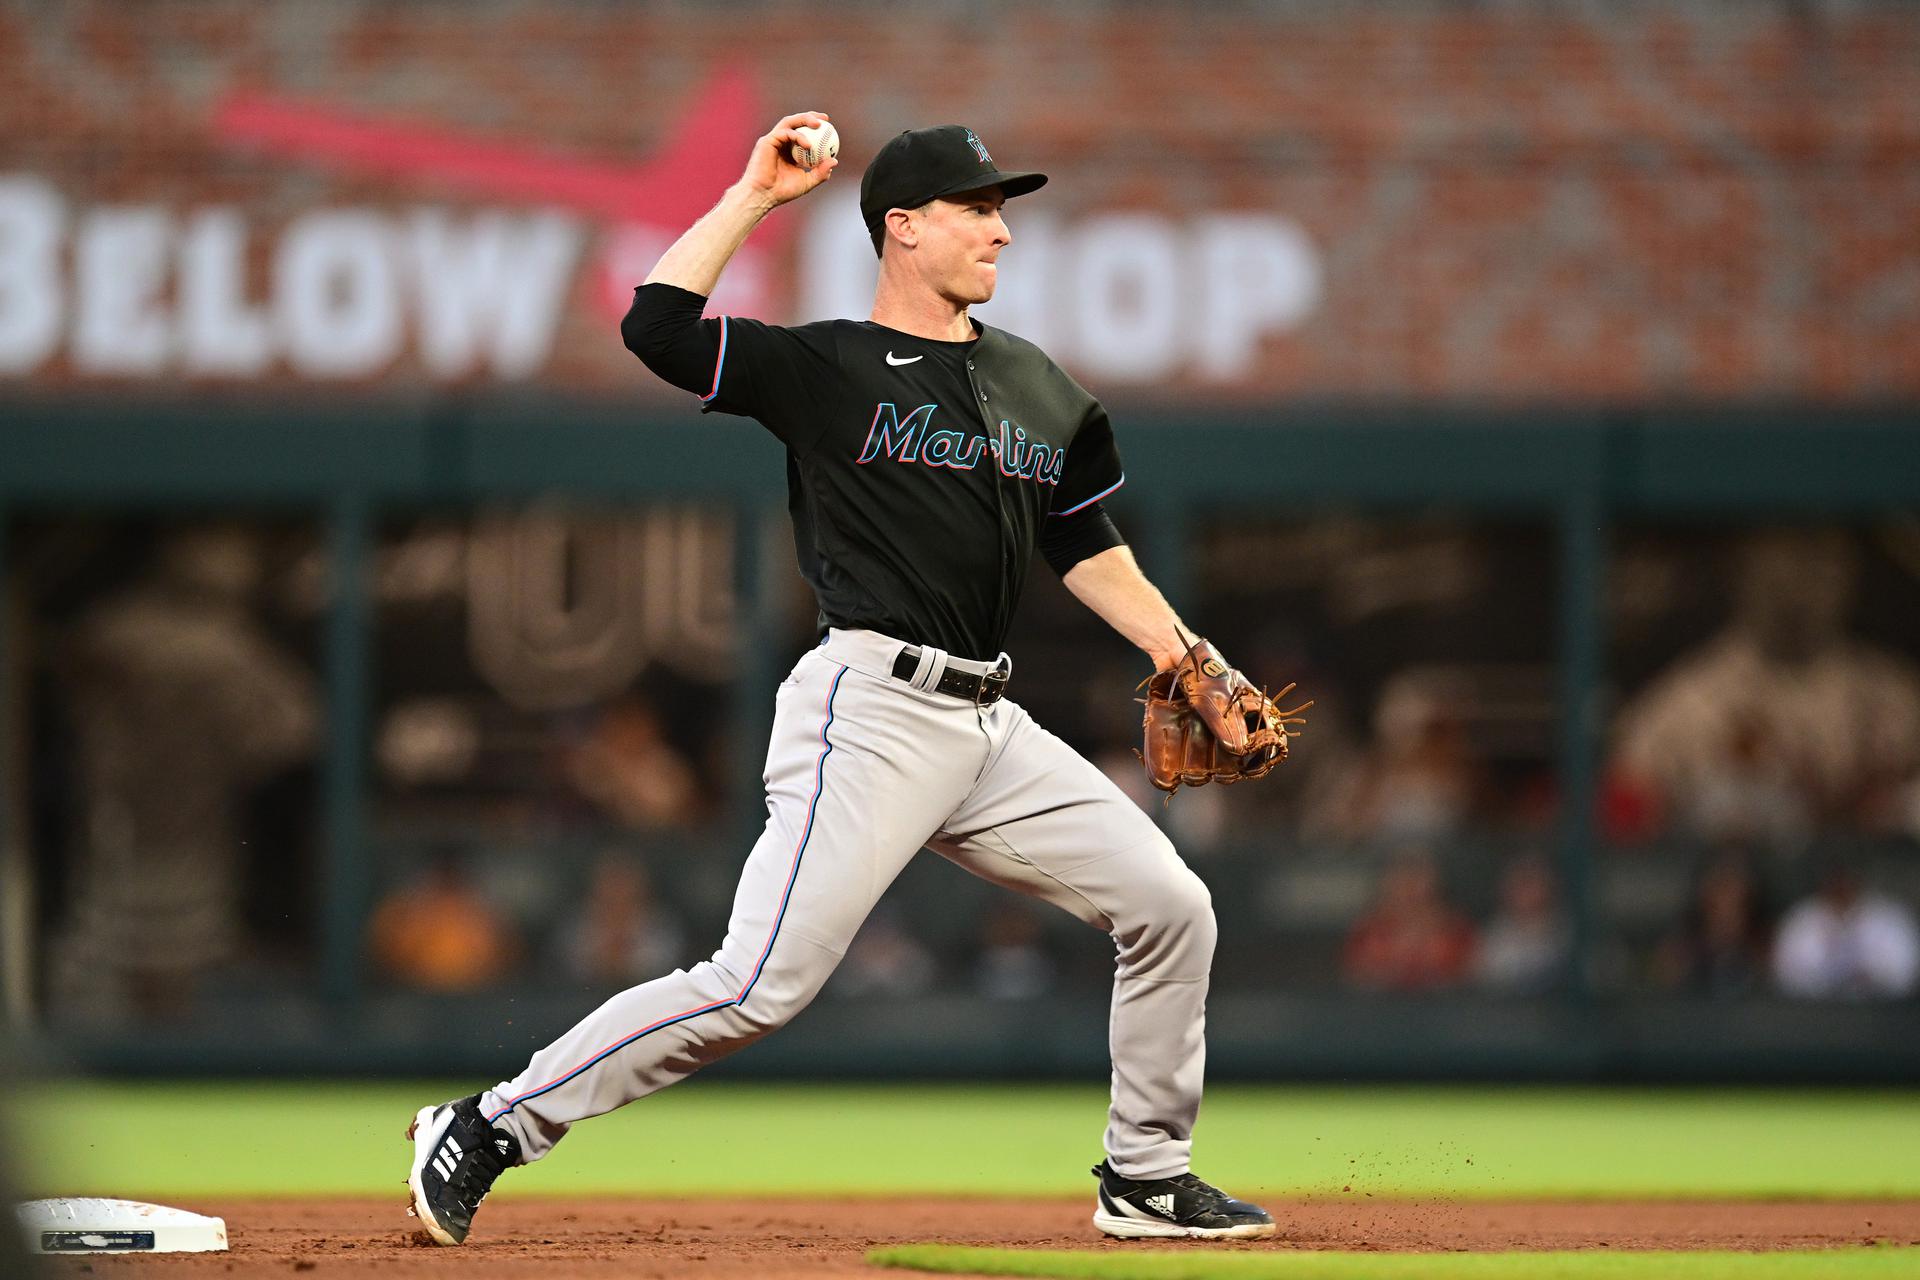 Joey Wendle throws a baseball from the infield while wearing a black Marlins jersey